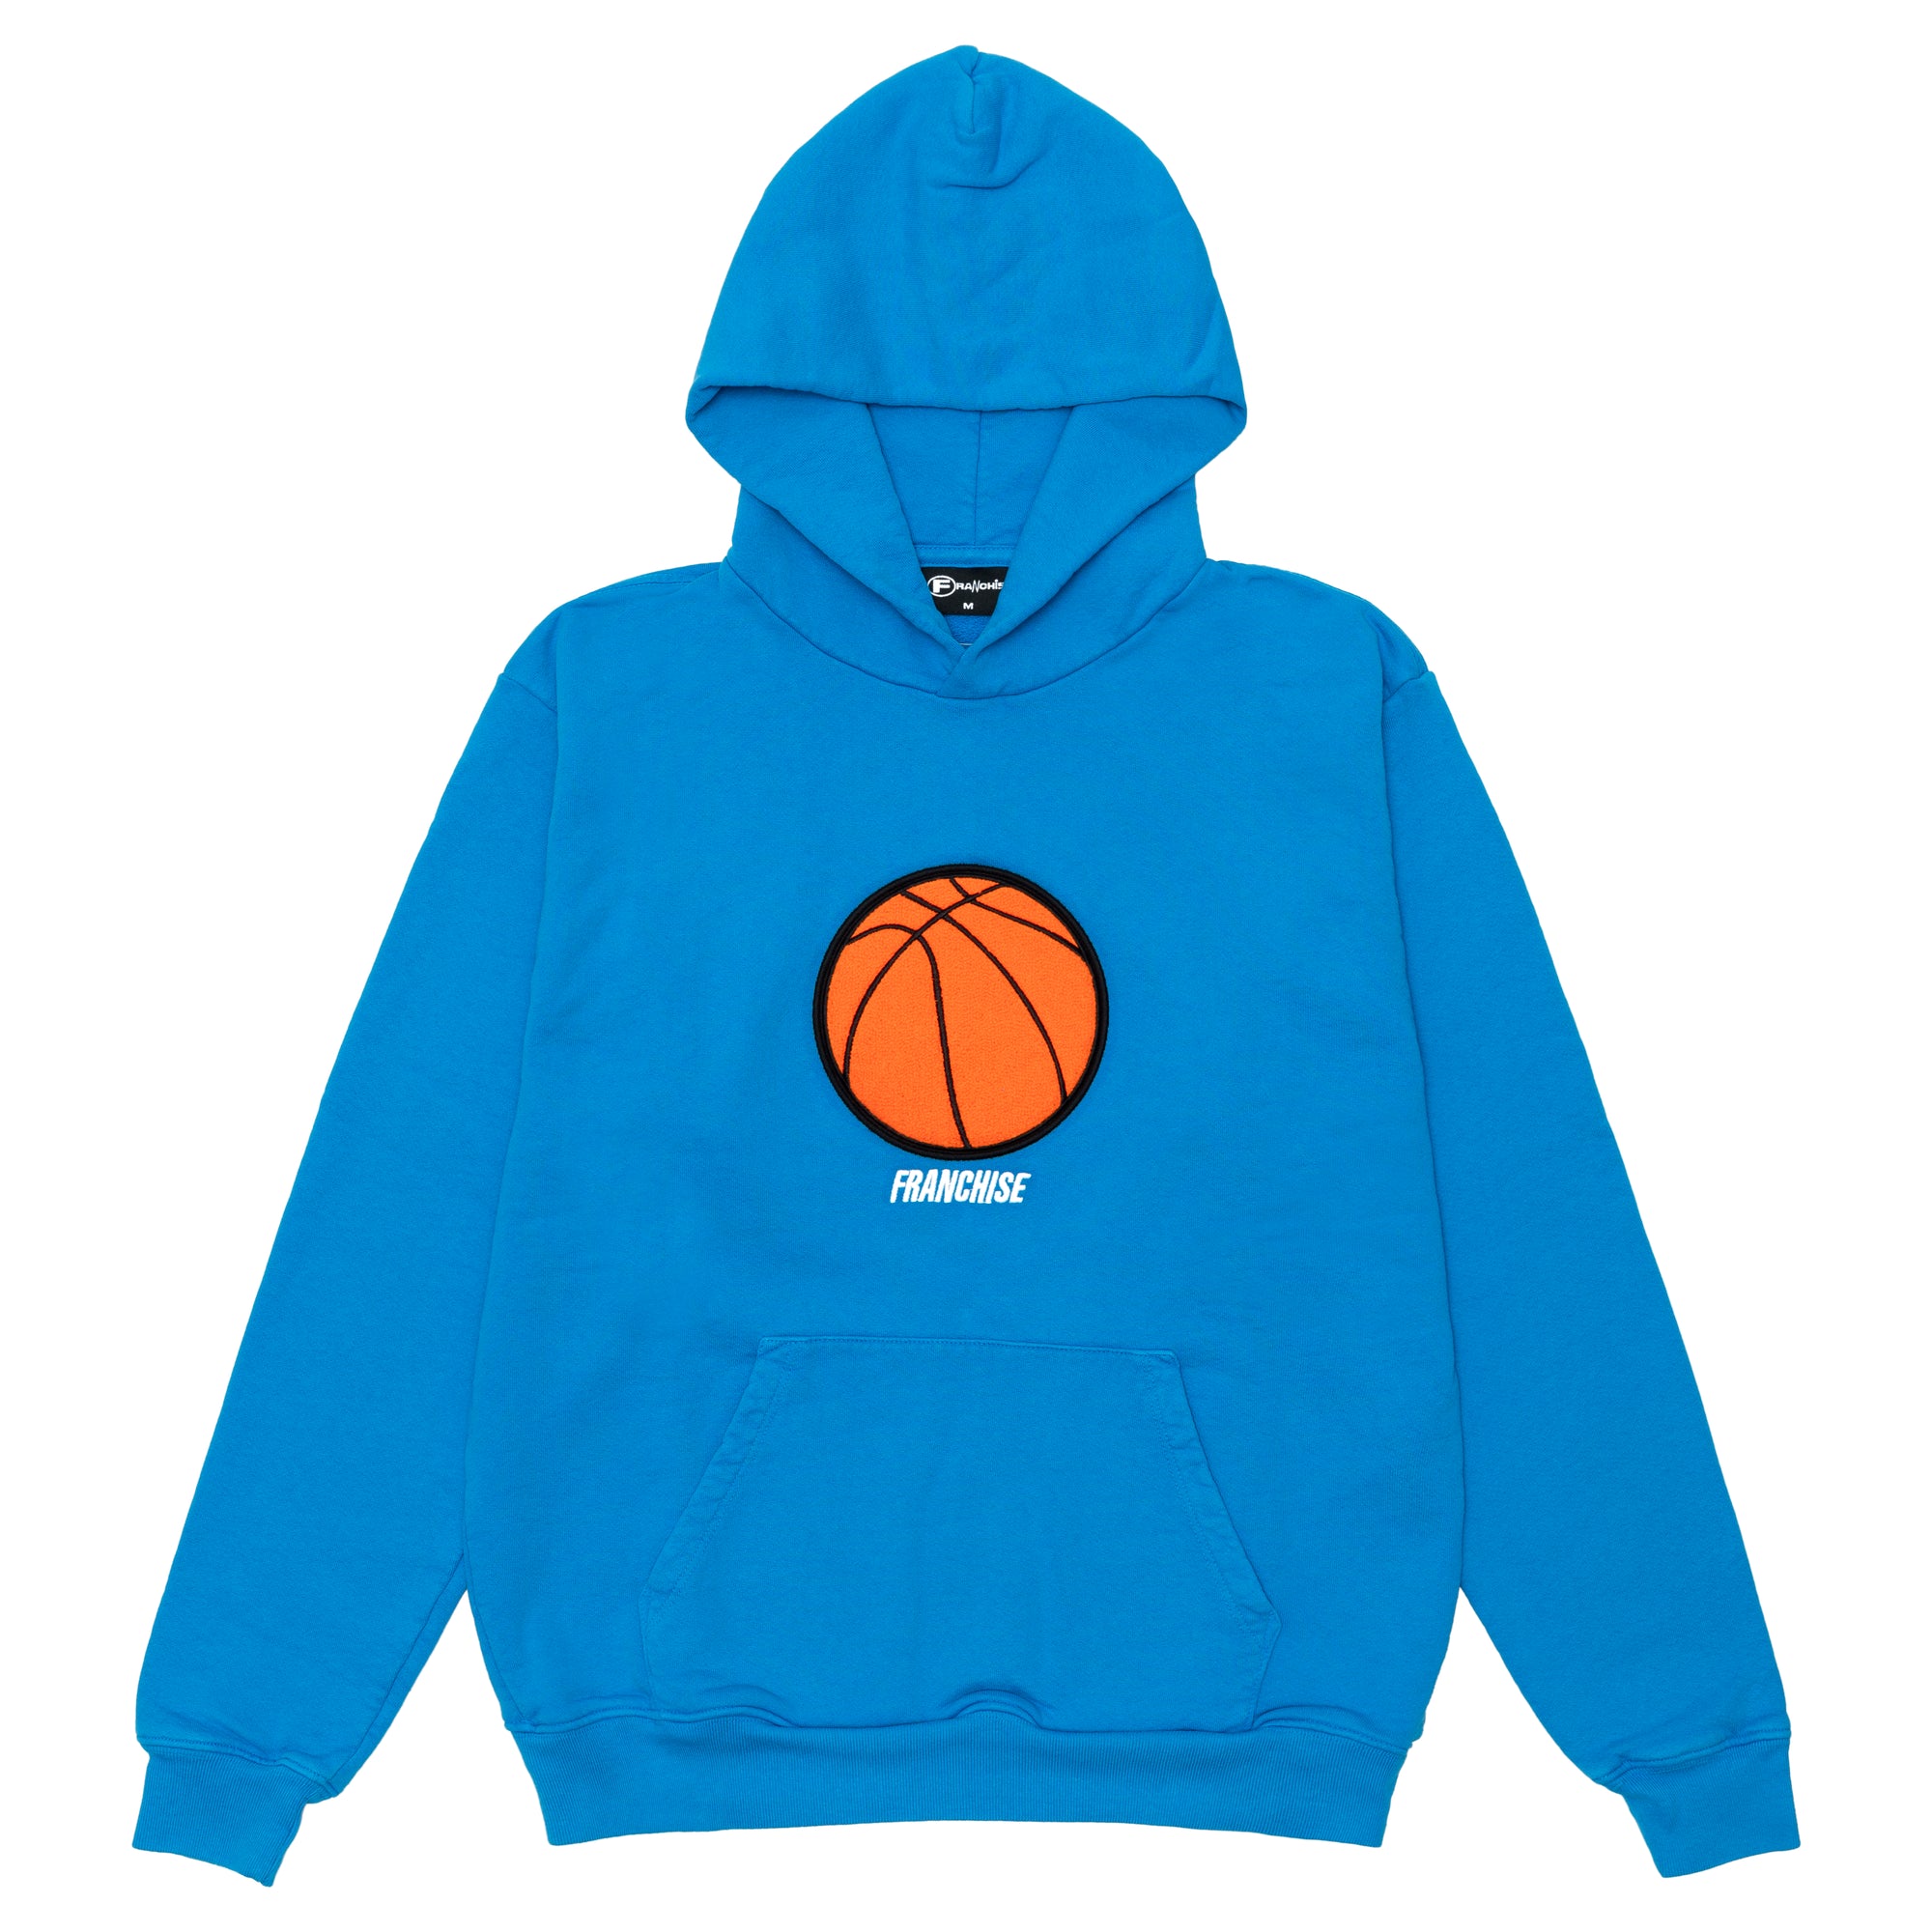 FRANCHISE - All-Time Sweatshirt - (Blue) view 1